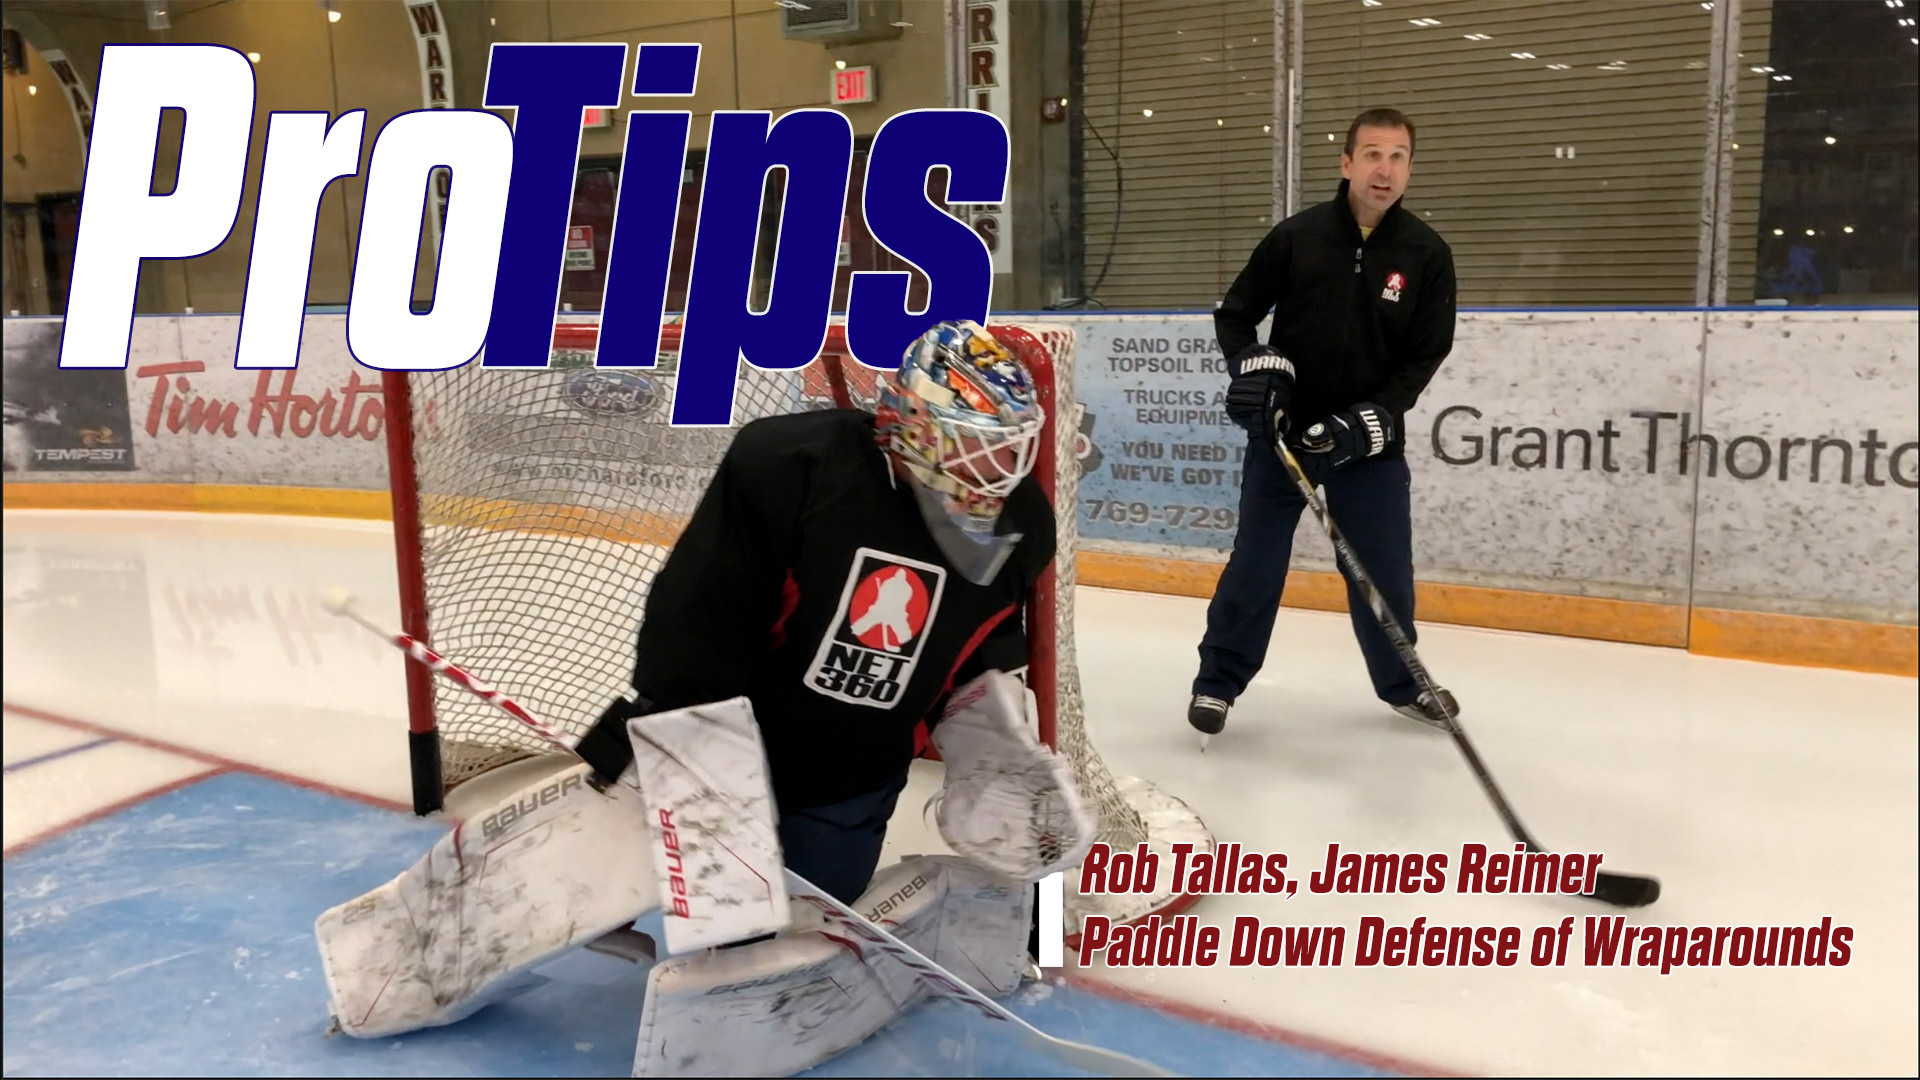 Pro-Tips: Rob Tallas, James Reimer and Paddle Down Defense of Wraparounds